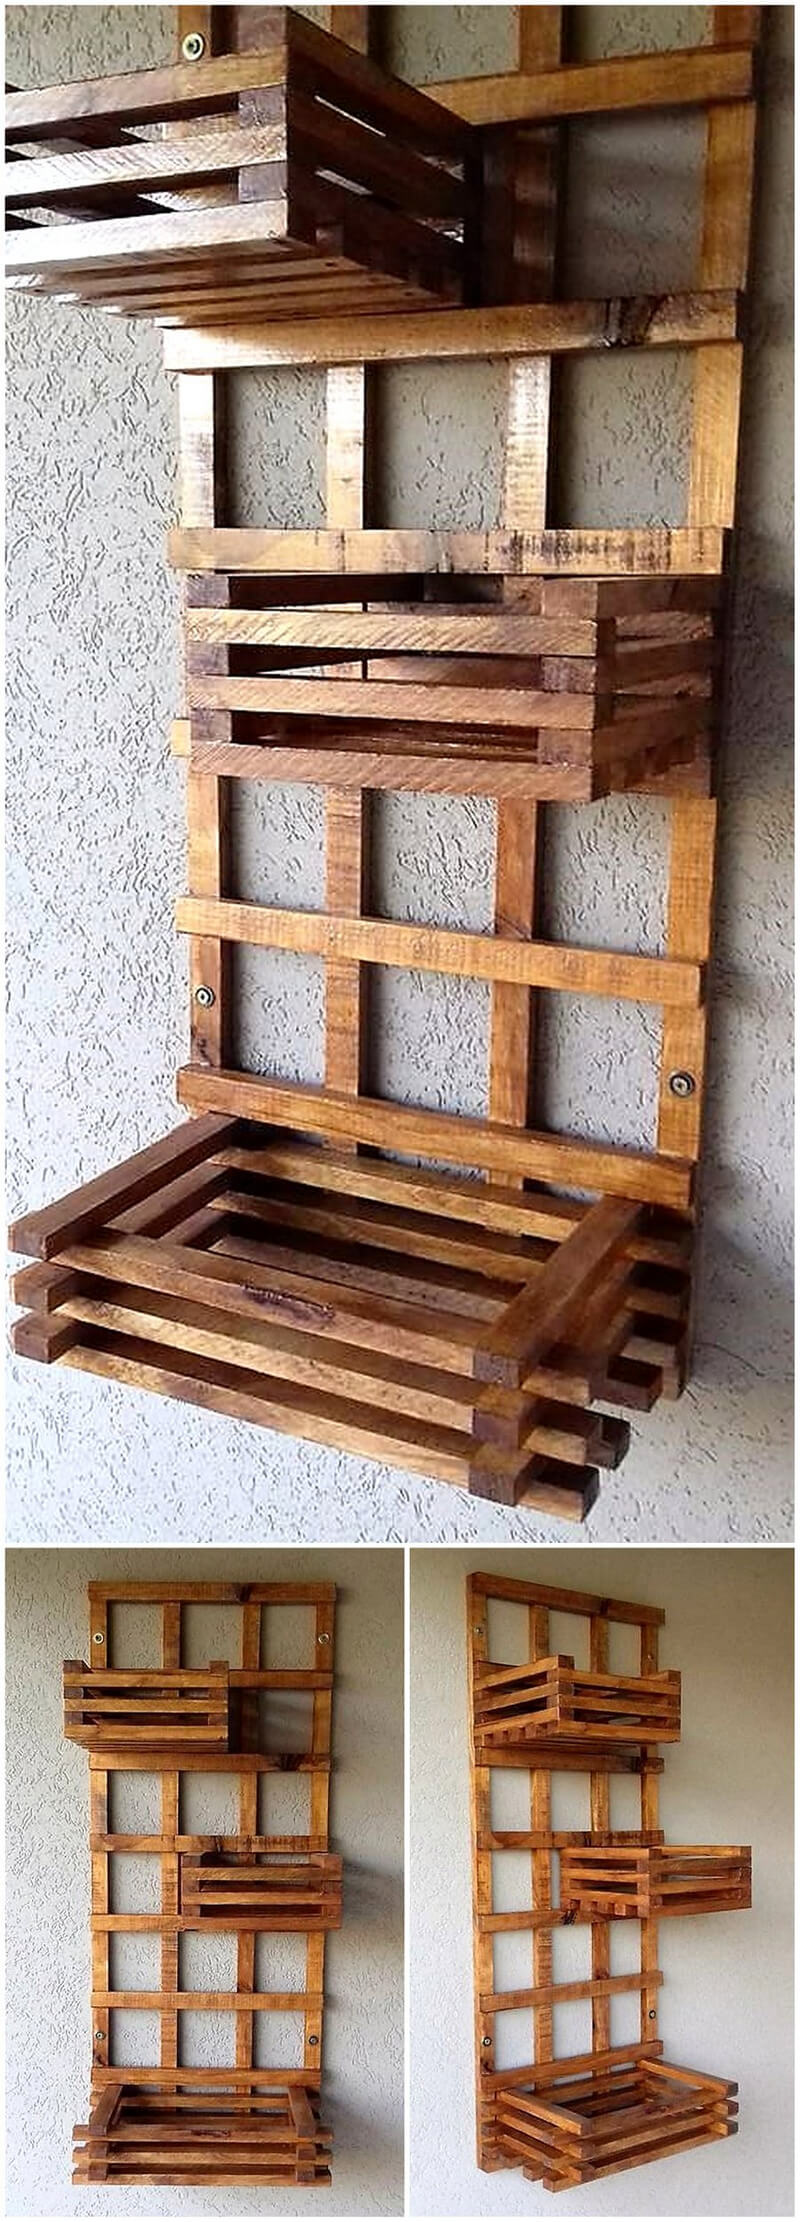 wooden pallets wall pots stand